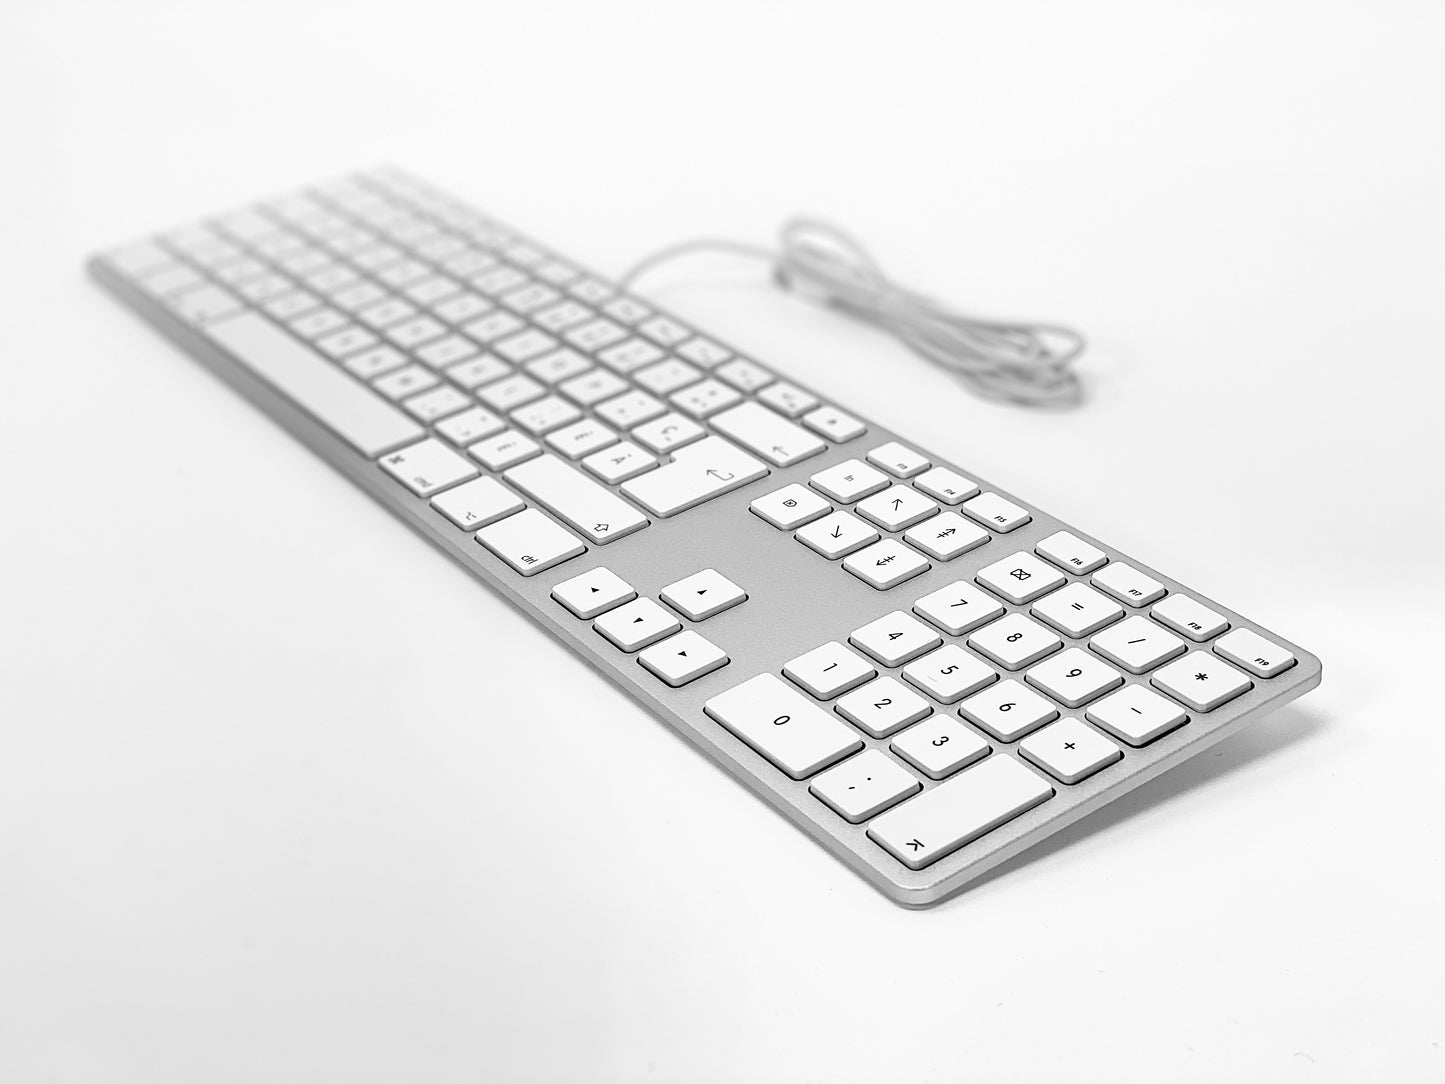 Wired Aluminum Keyboard for Mac - Silver - French Canadian Version